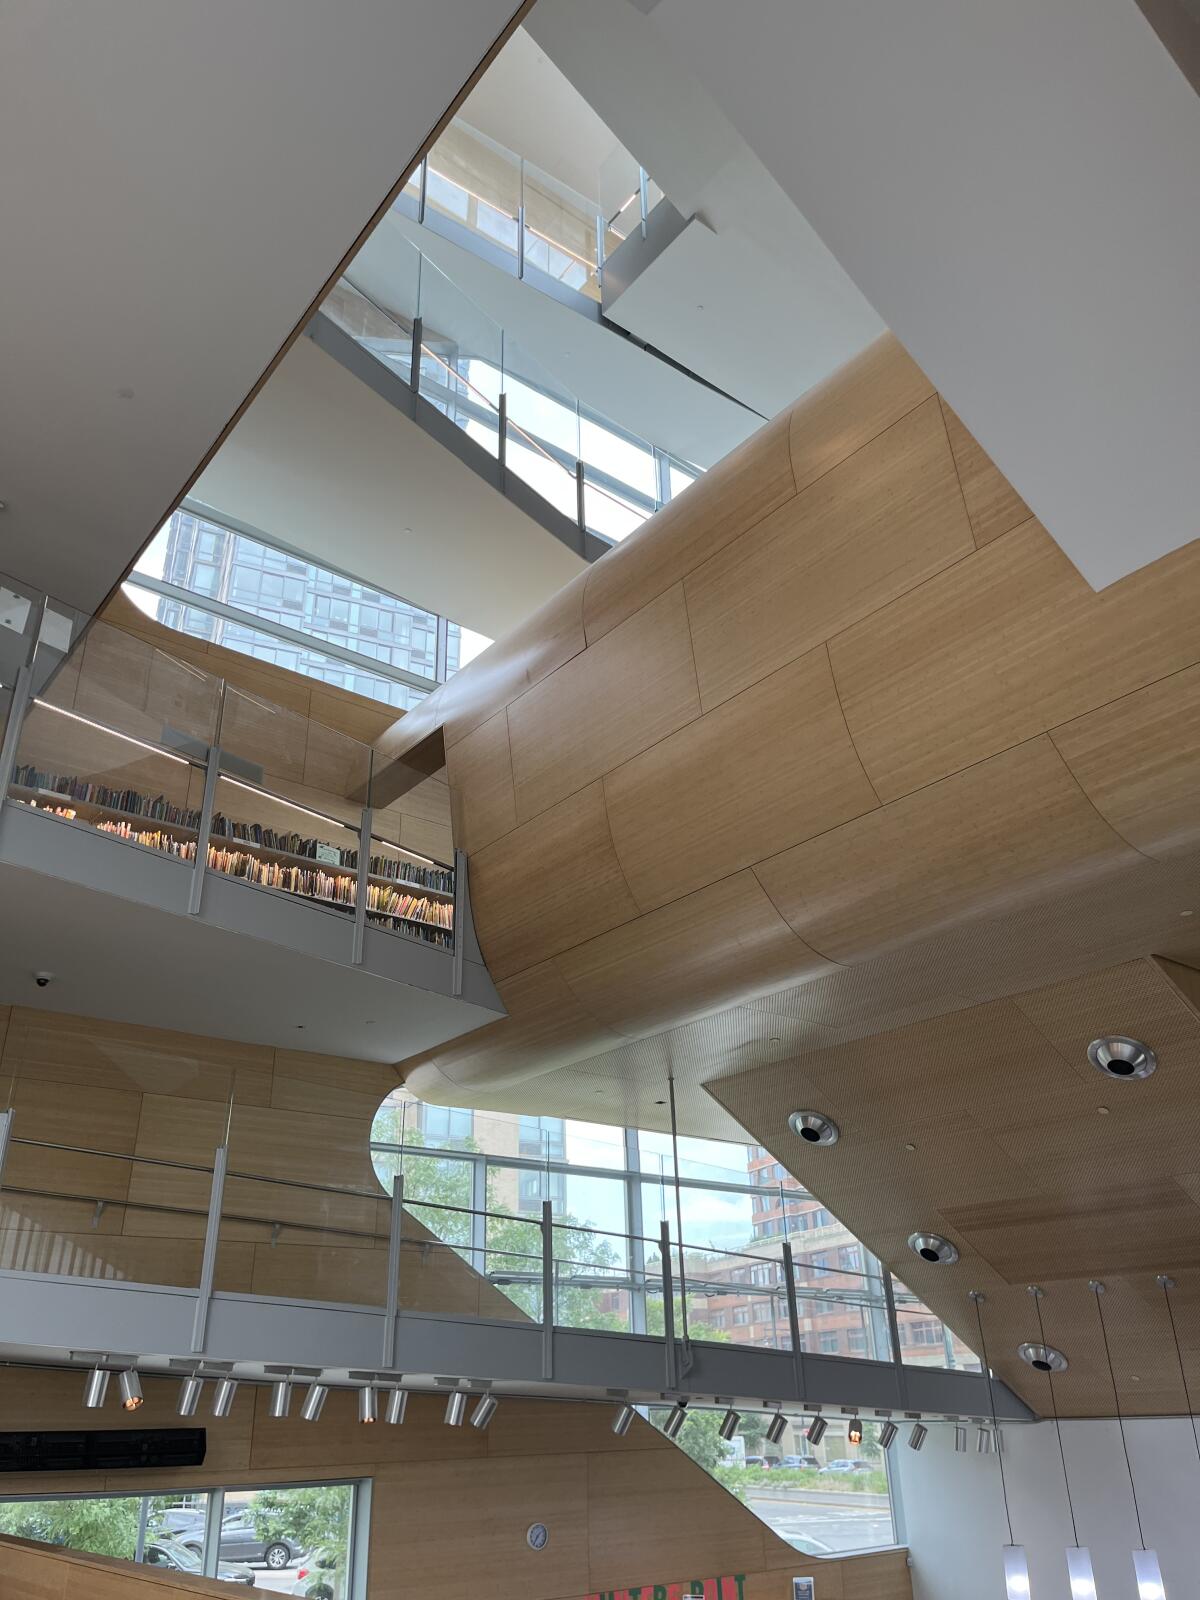 An upward view of a wood-lined atrium sows daylight pouring through windows on several floors